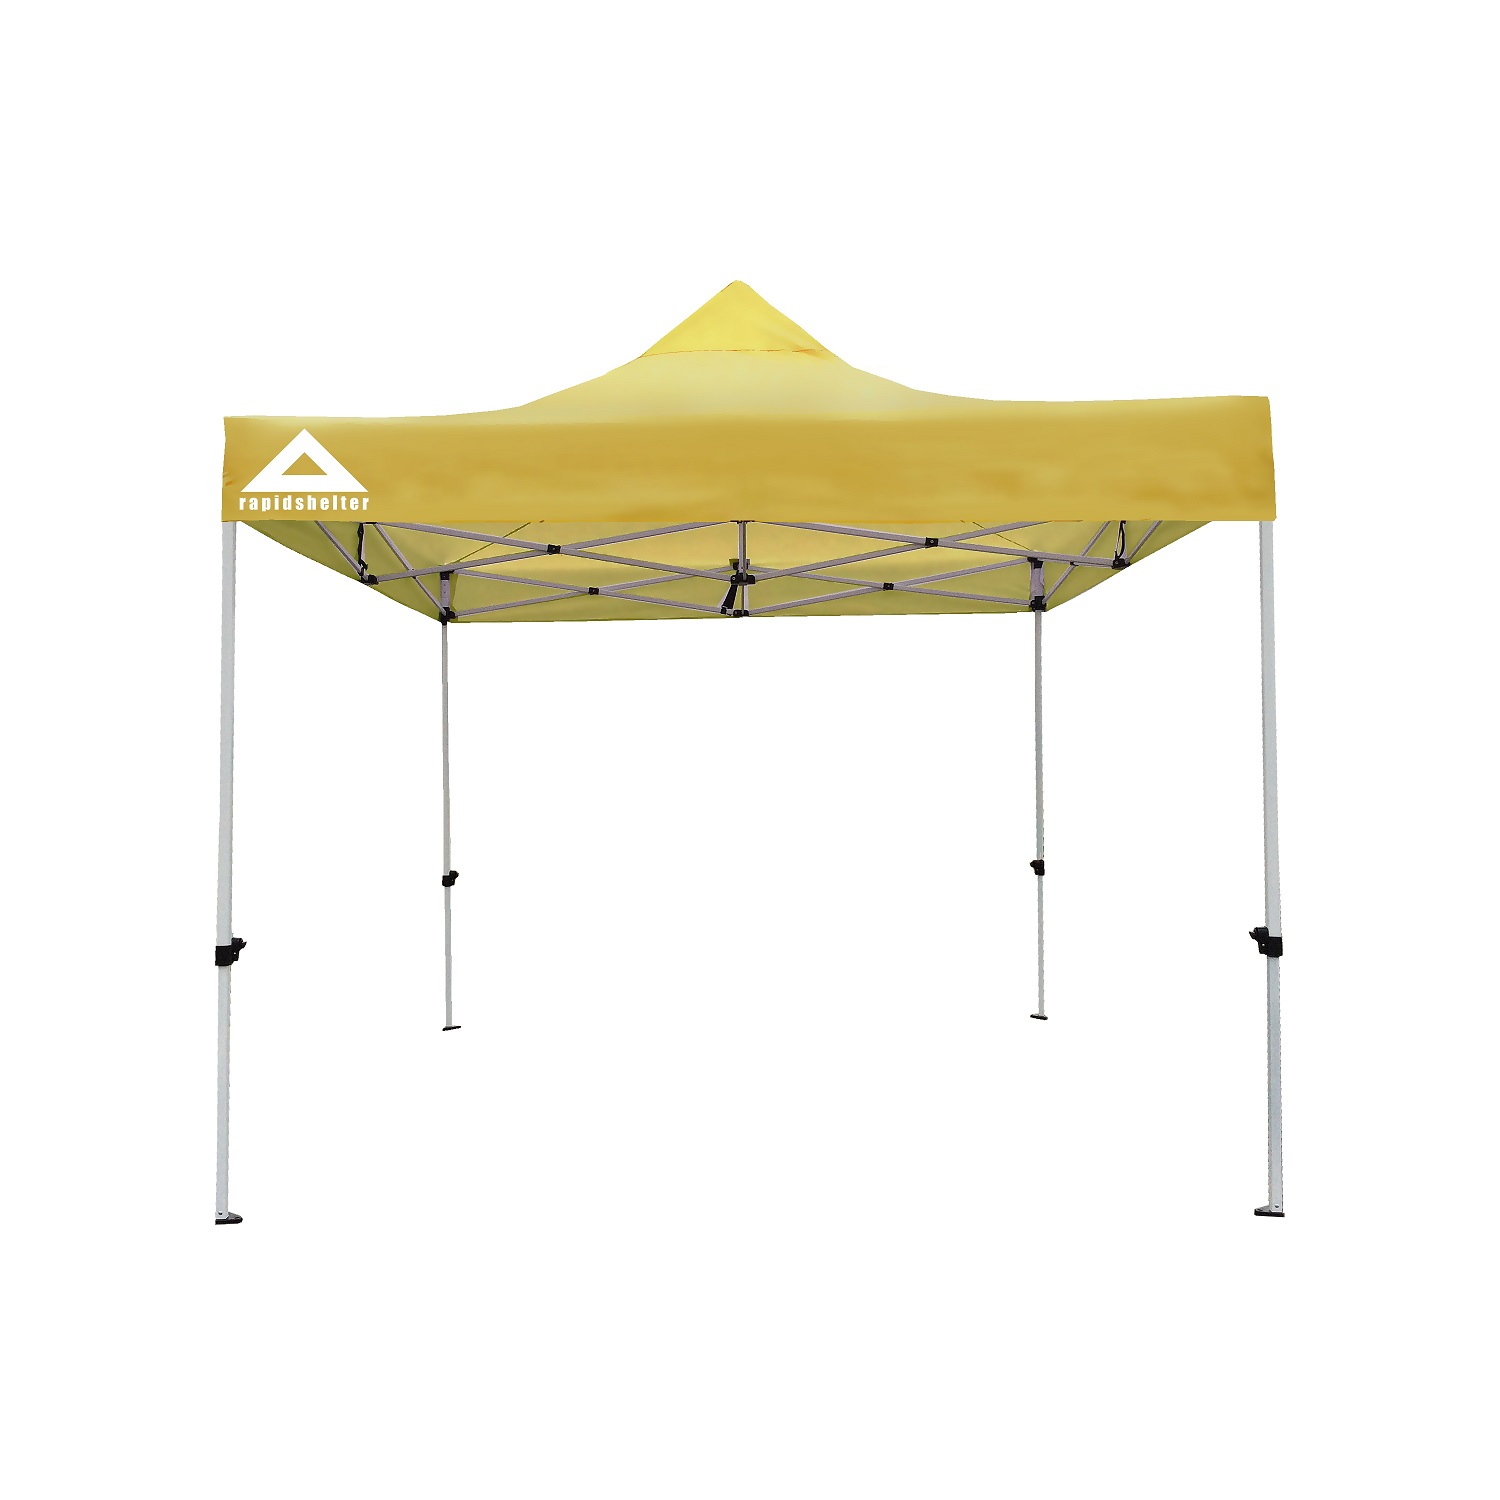 Caddis Sports Caddis Rapid Shelter Canopy 10x10 Yellow - Rs 10x10 Y